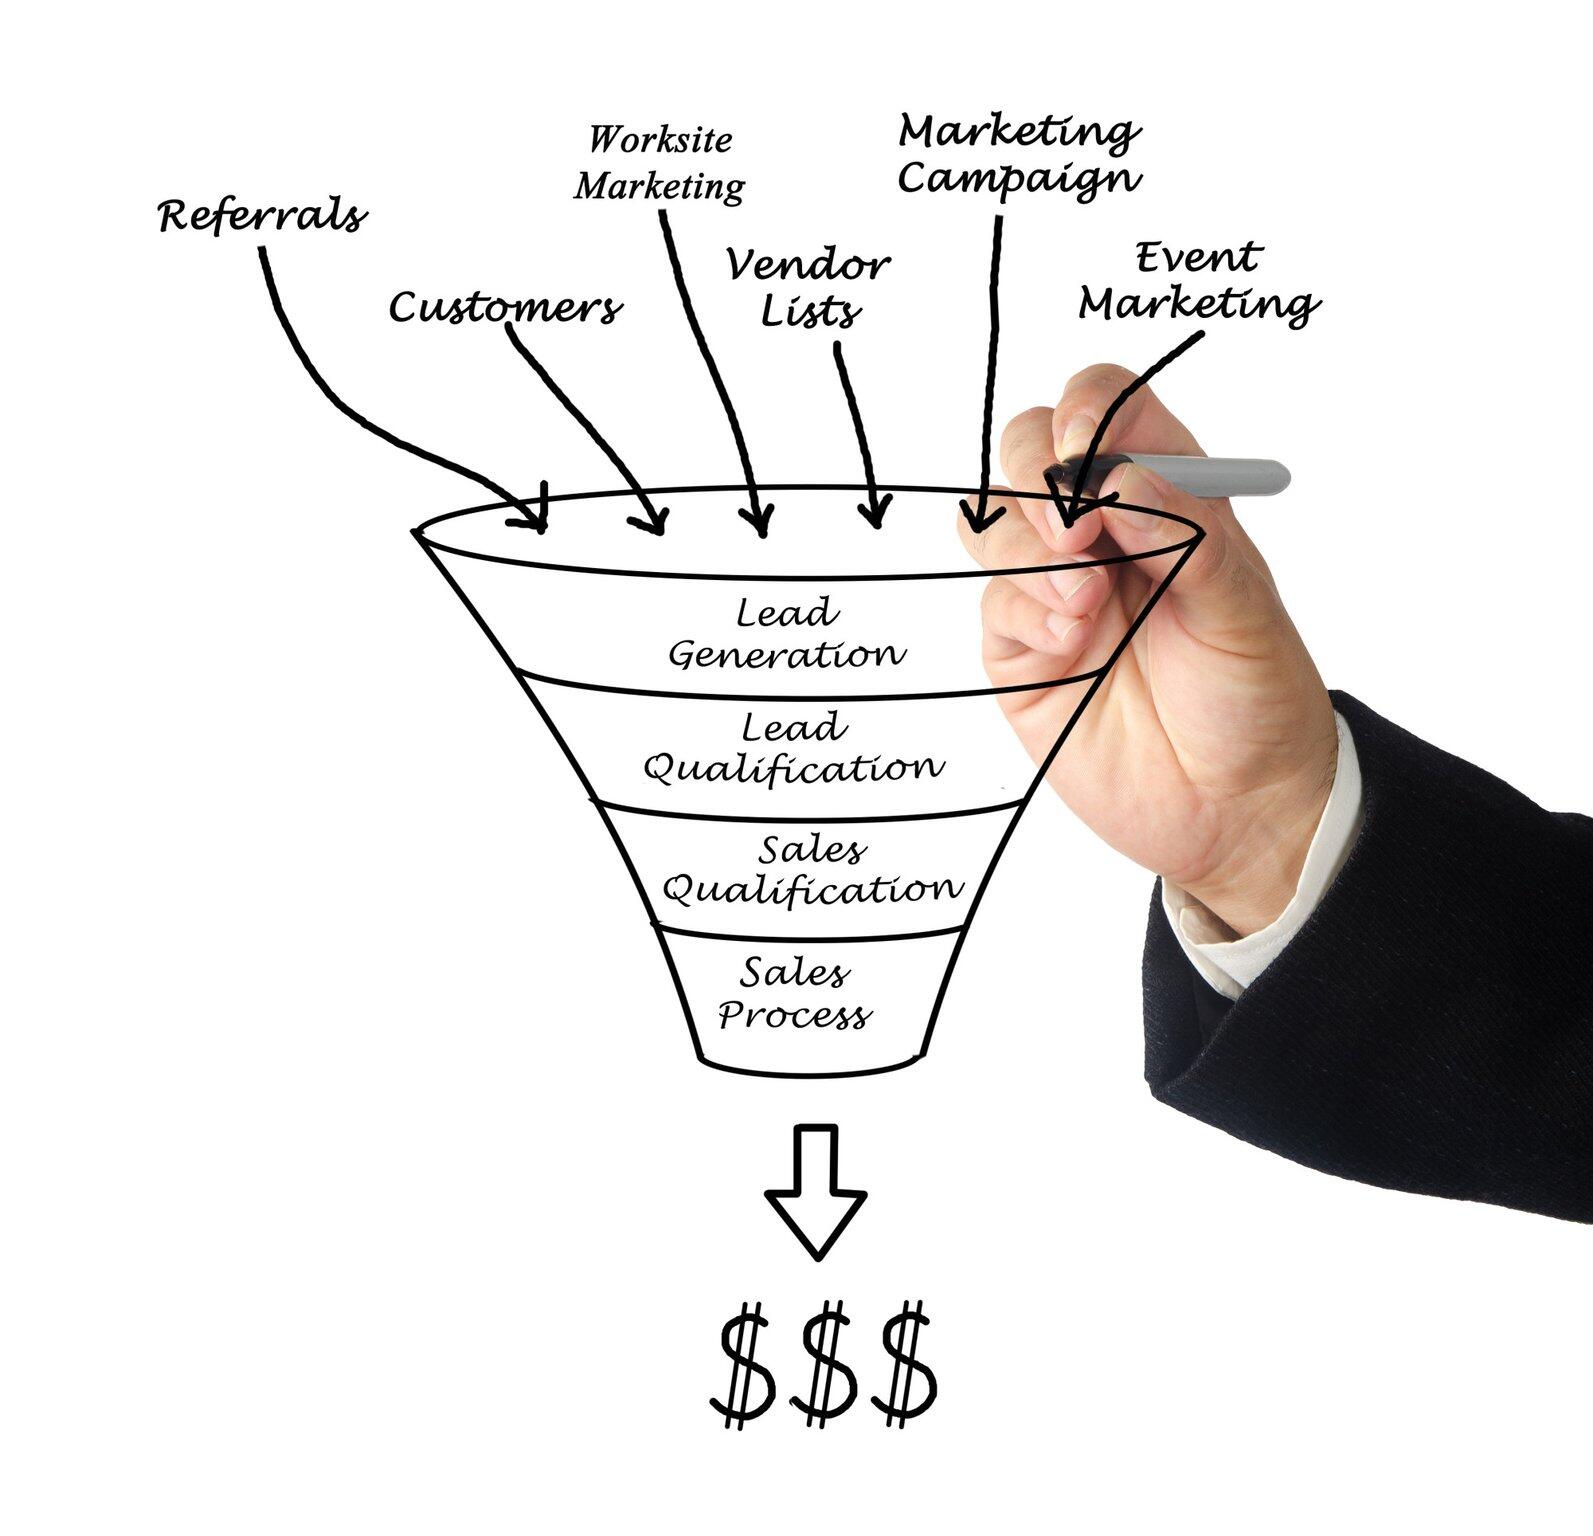 what is a marketing funnel